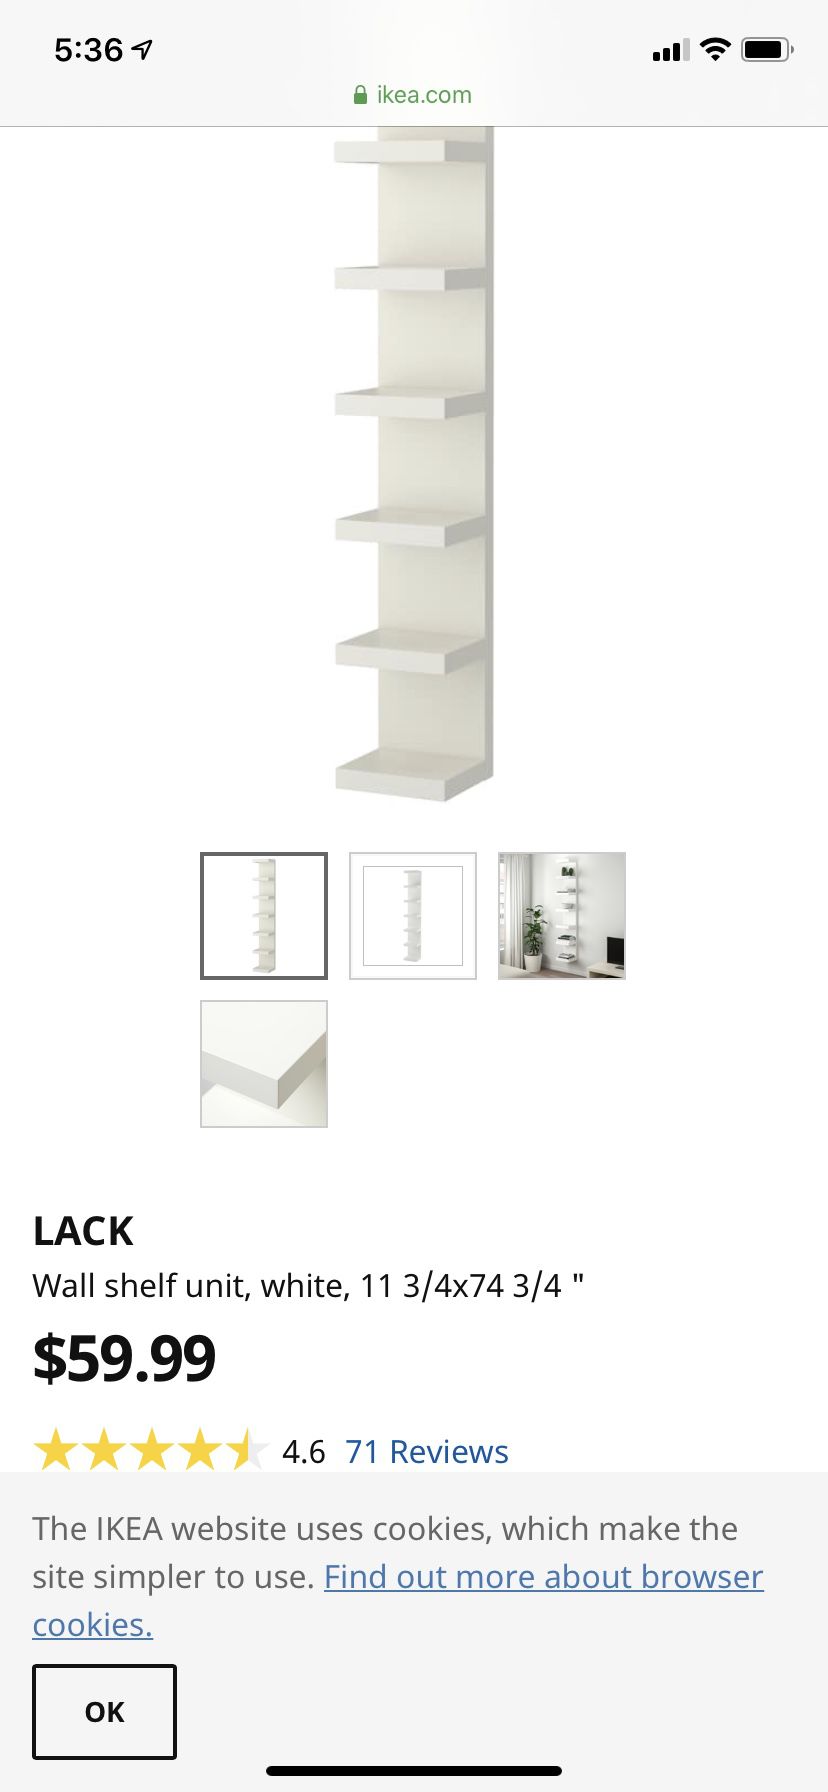 I have these same exact 2 shelving systems. Selling them for $40 a shelf unit.